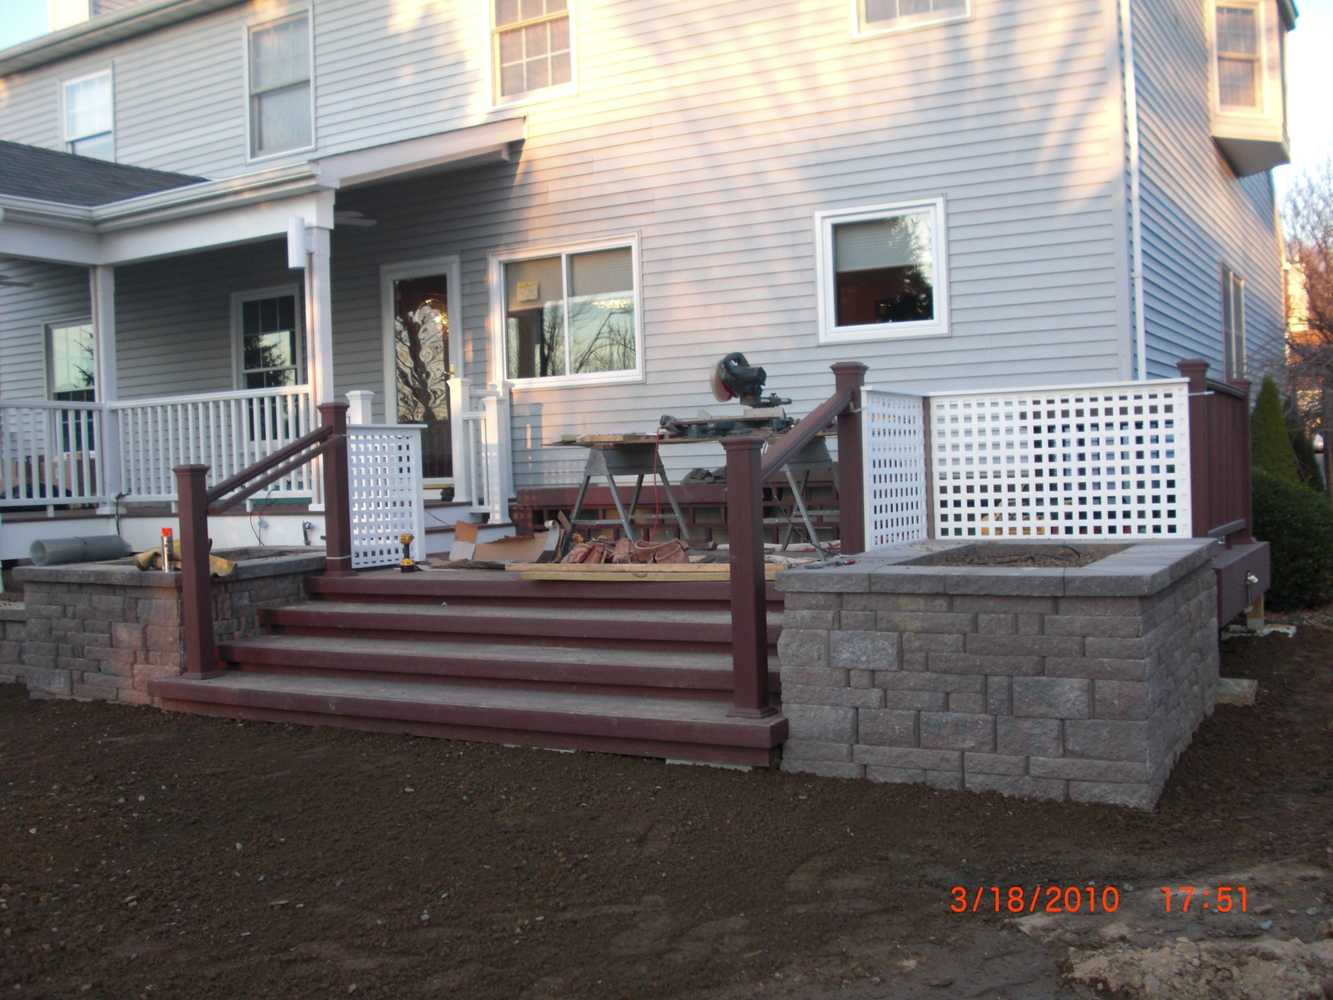 Project photos from Rc Home Improvement Contractors Llc